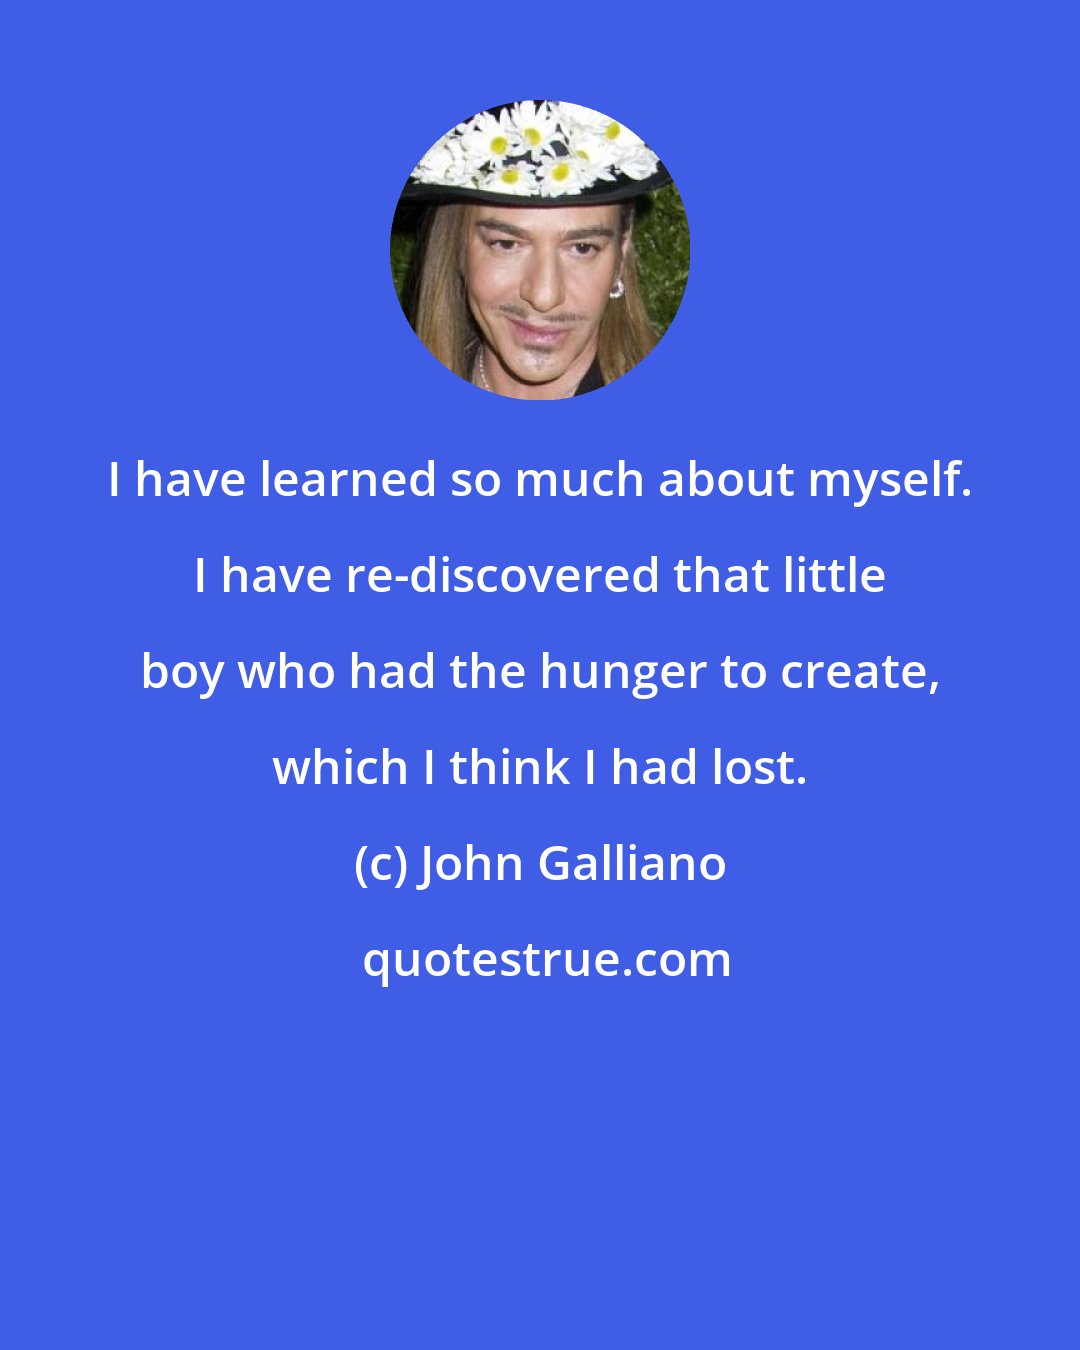 John Galliano: I have learned so much about myself. I have re-discovered that little boy who had the hunger to create, which I think I had lost.